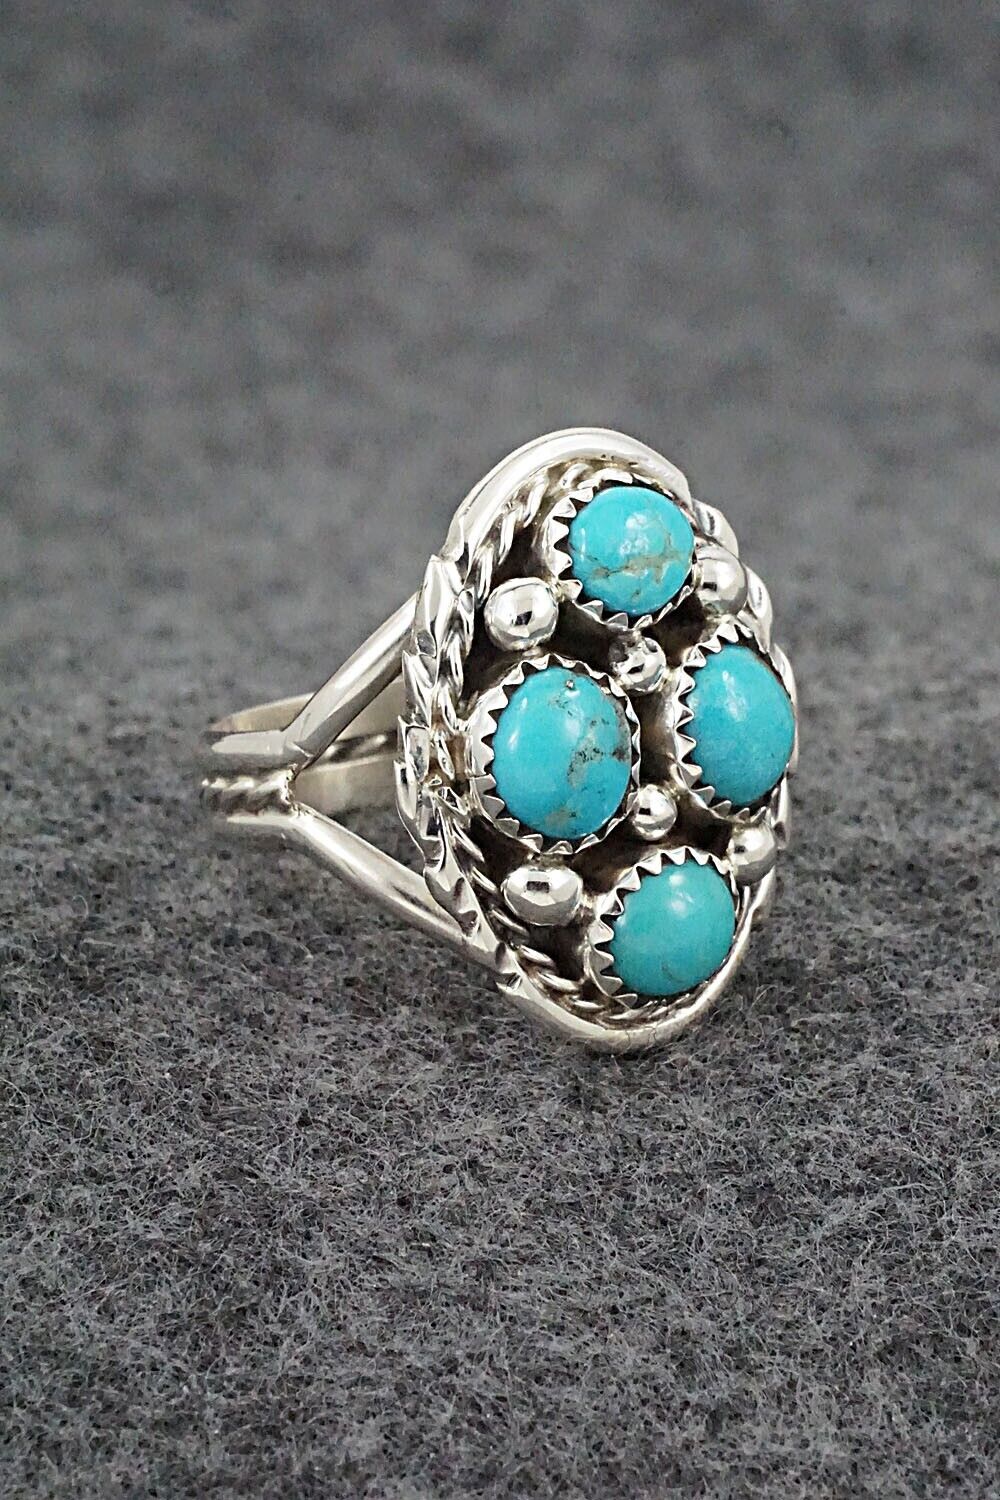 Turquoise & Sterling Silver Ring - Melvin Chee - Size 9